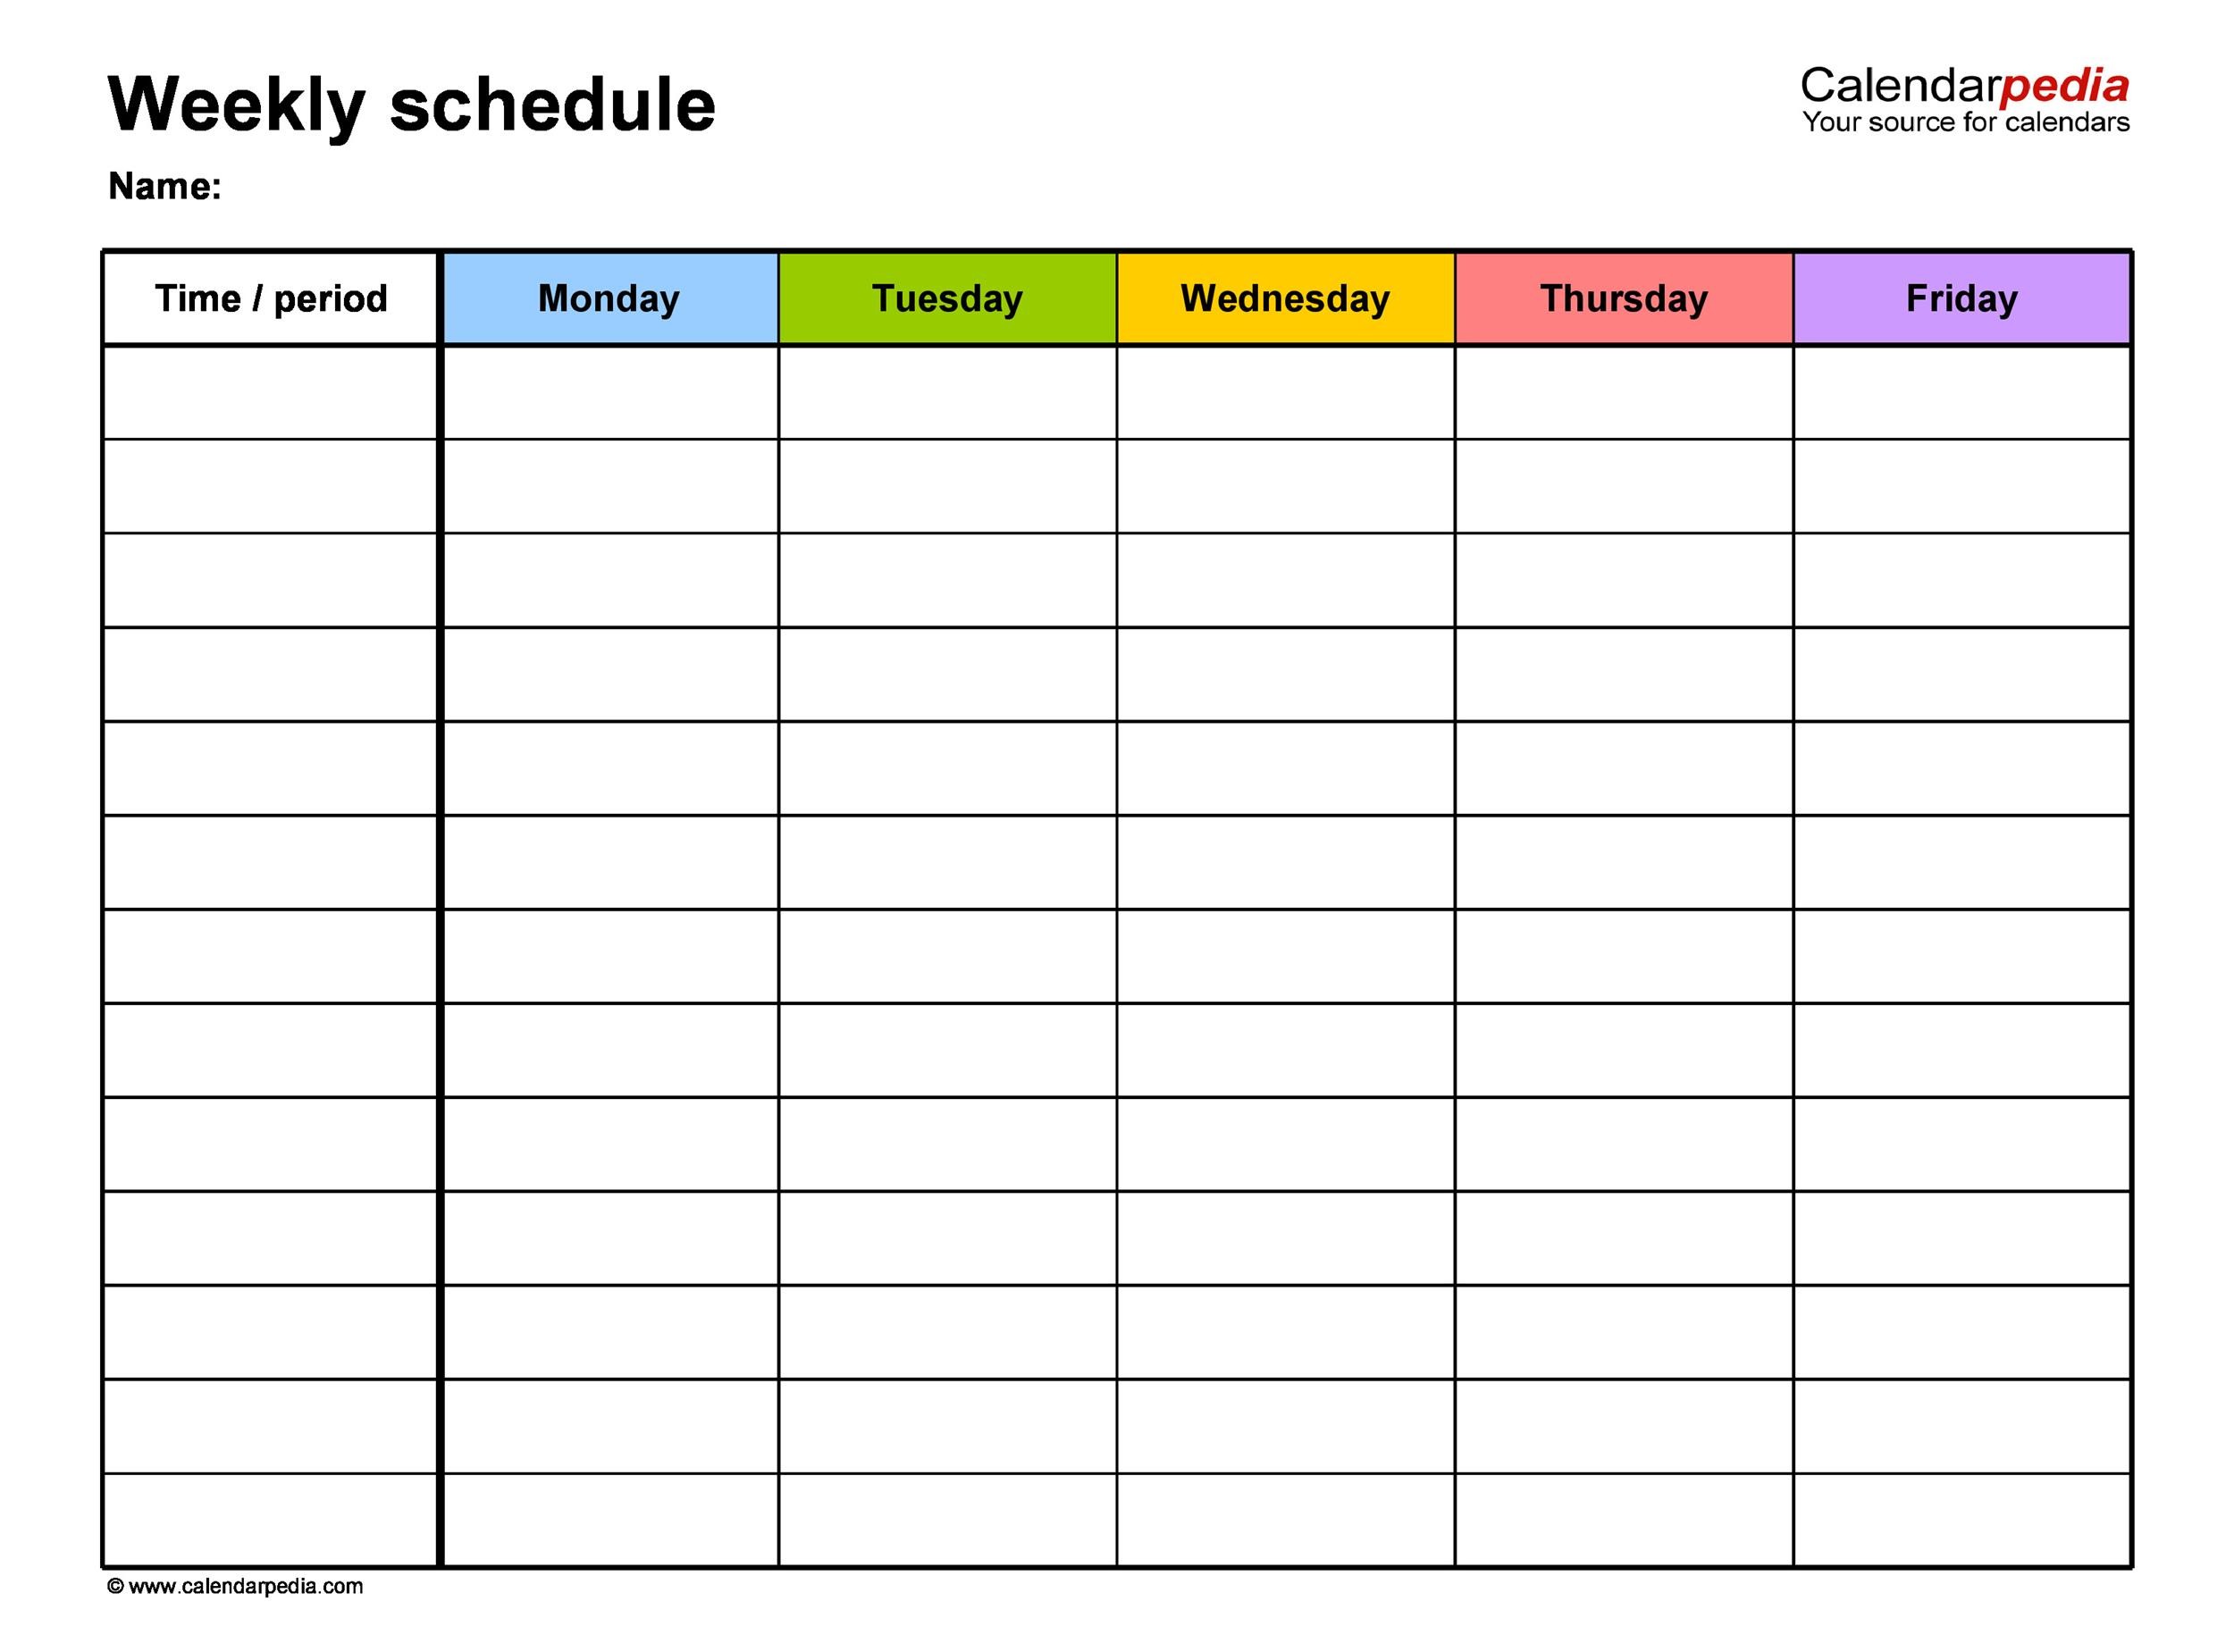 Daily Work Schedule Templates